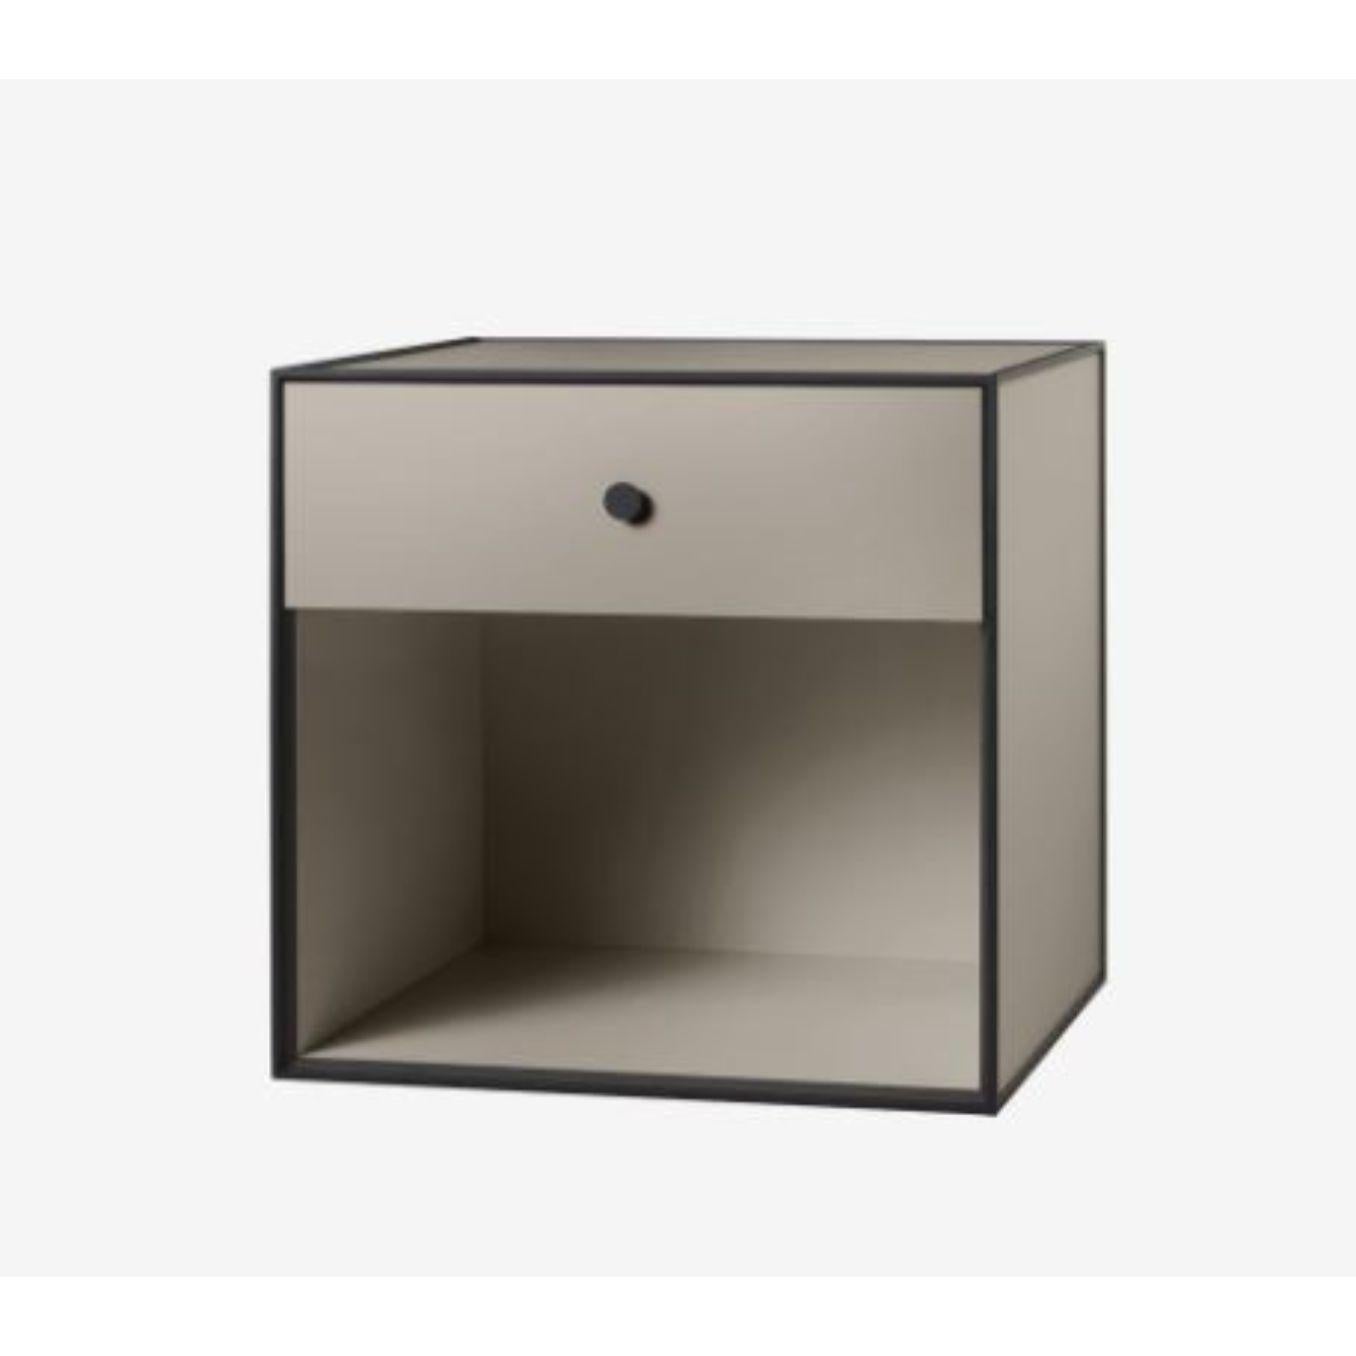 49 Sand frame box with 1 drawer by Lassen.
Dimensions: D 49 x W 42 x H 49 cm. 
Materials: finér, melamin, melamin, melamine, metal, veneer.
Also available in different colours and dimensions. 
Weight: 15 Kg.


By Lassen is a Danish design